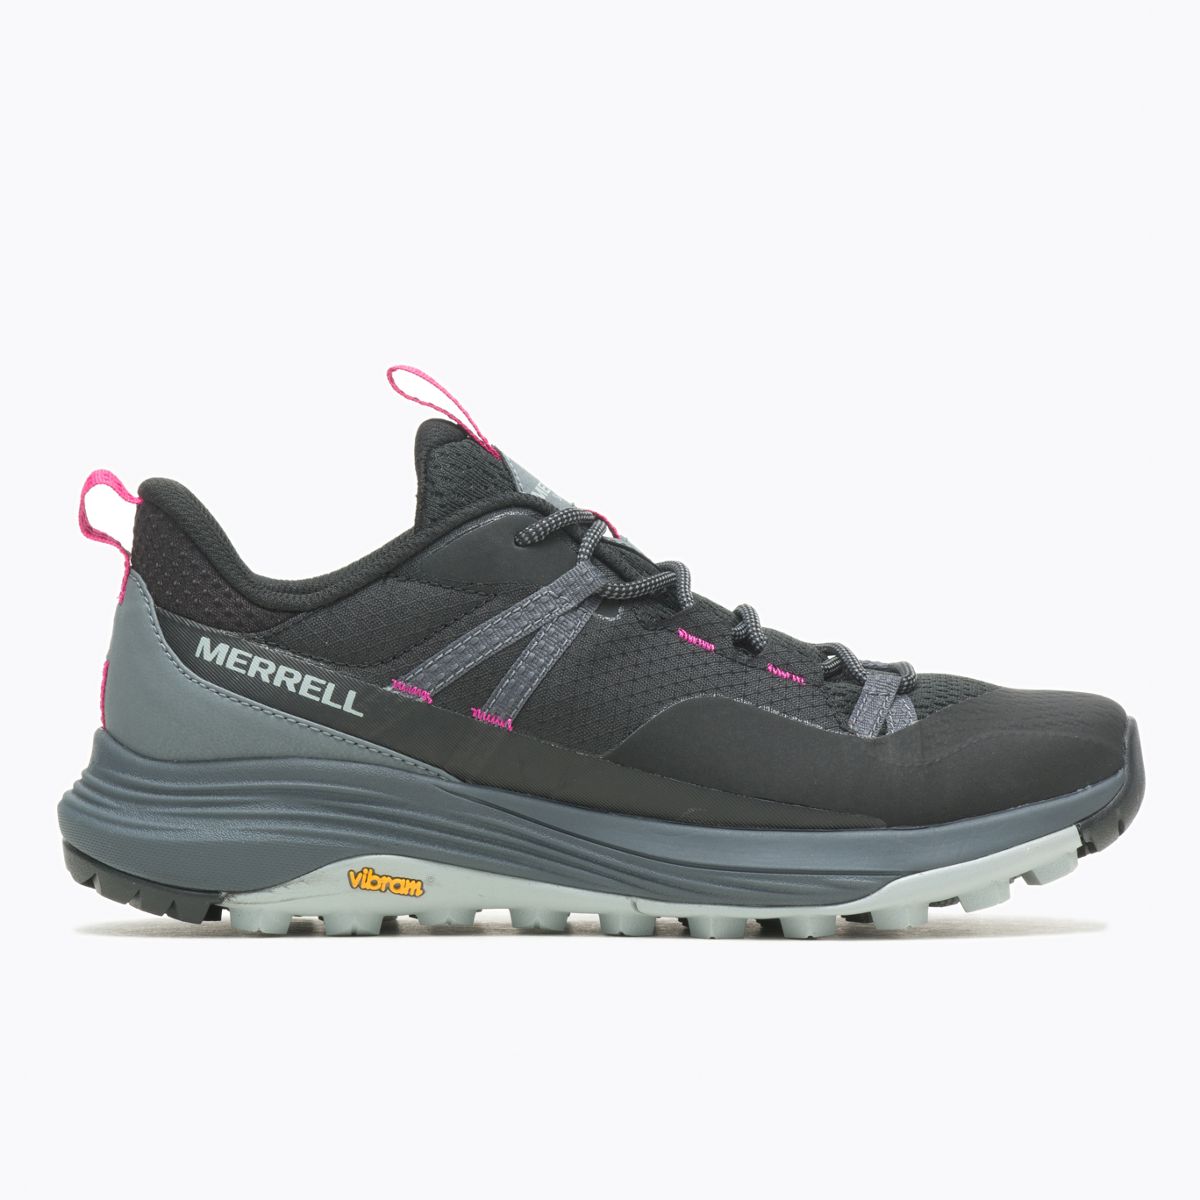 Running Shoes Vancouver - W Siren 4 Thermo Demi WP - Shop - The